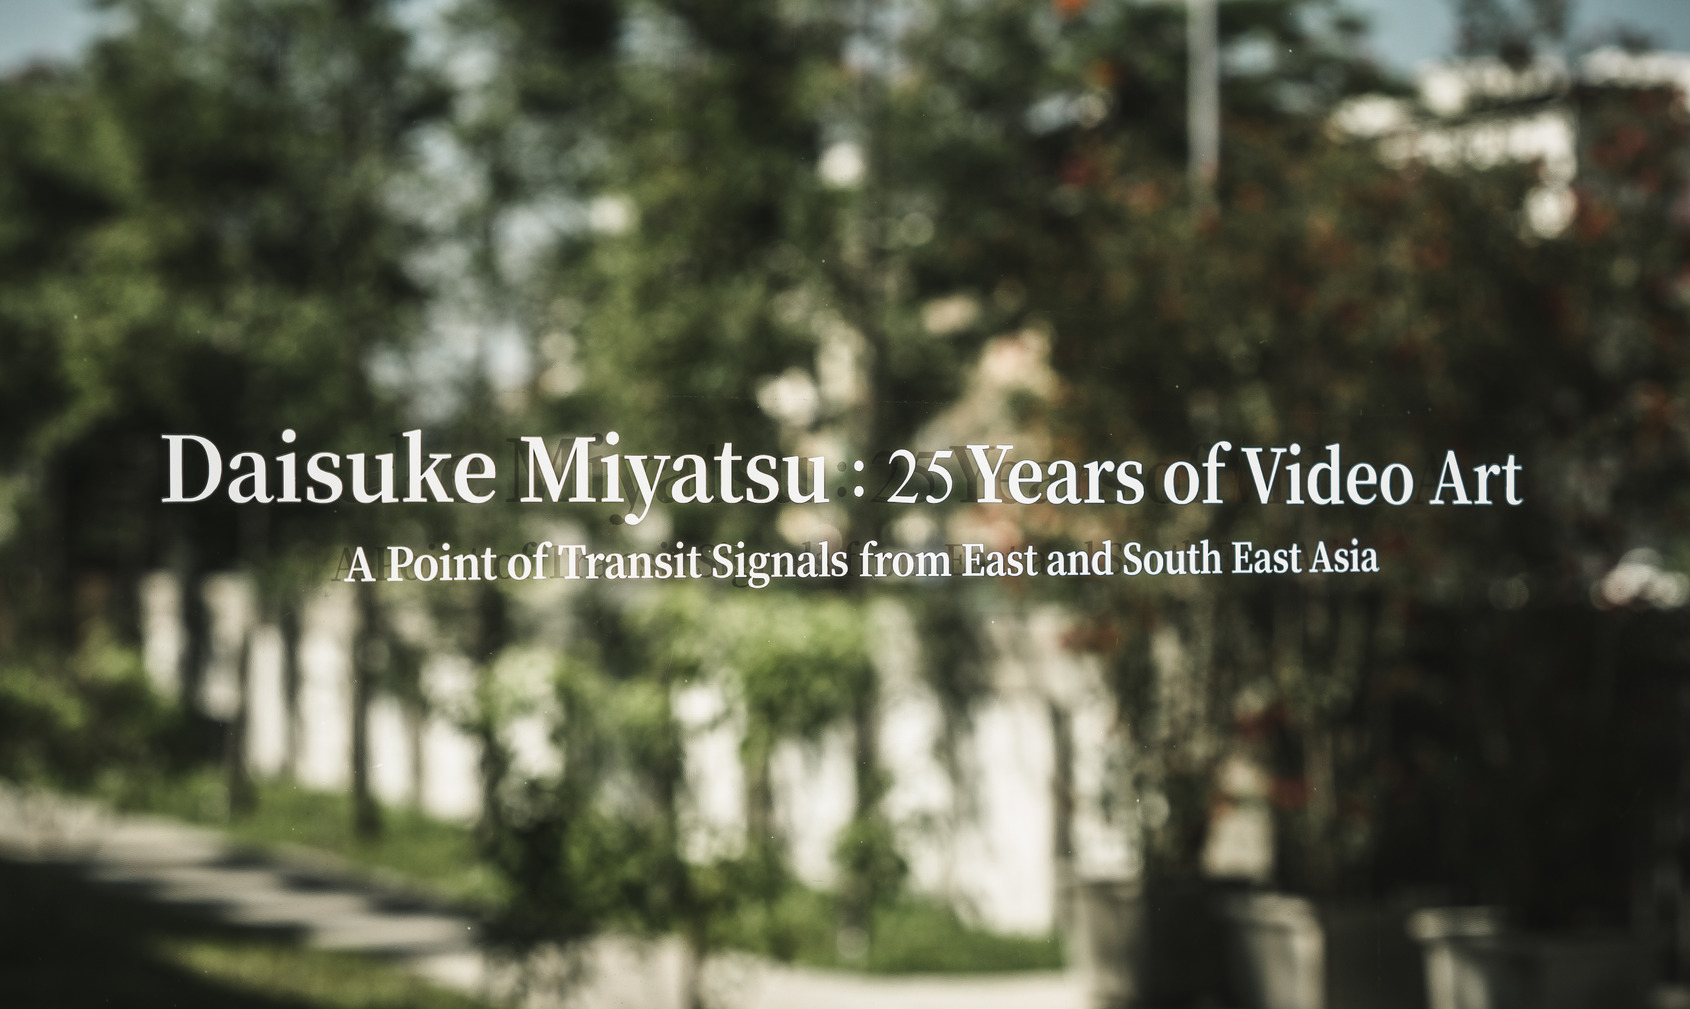  Daisuke Miyatsu: 25 years of video art - A point of transit signals from East and South East Asia © ALIEN Art Centre 